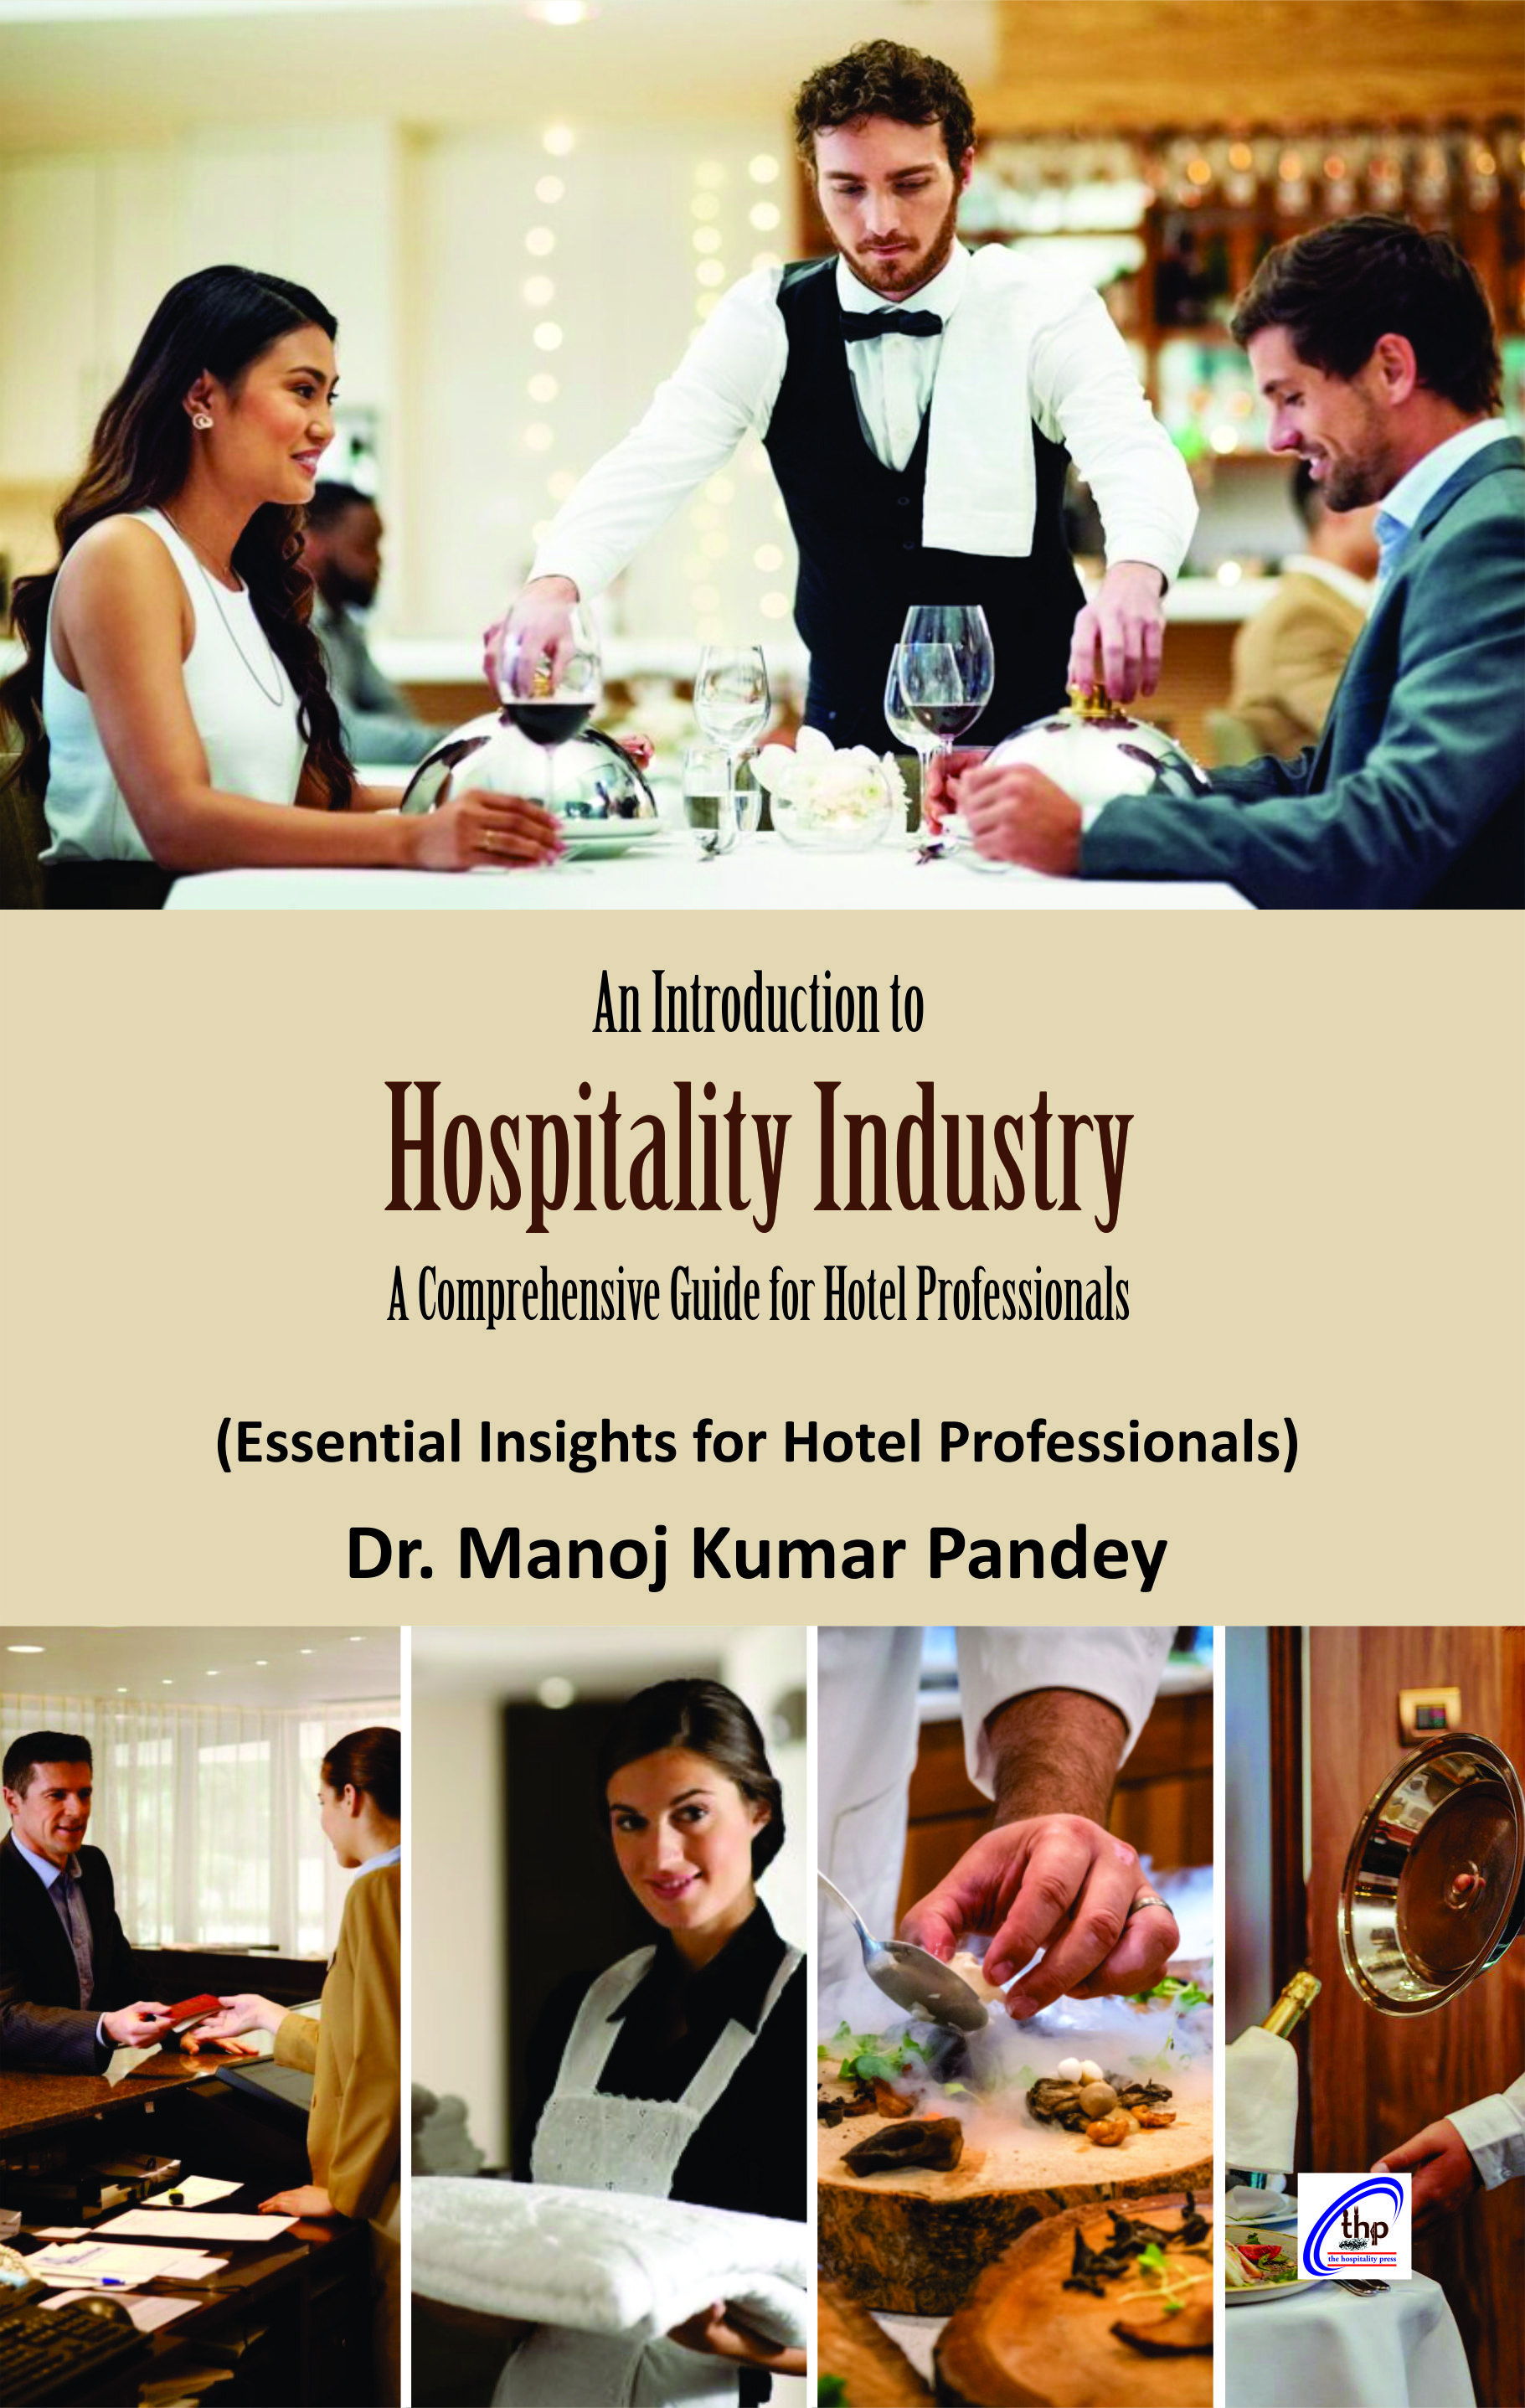 An Introduction to Hospitality Industry: A Comprehensive Guide for Hotel Professionals